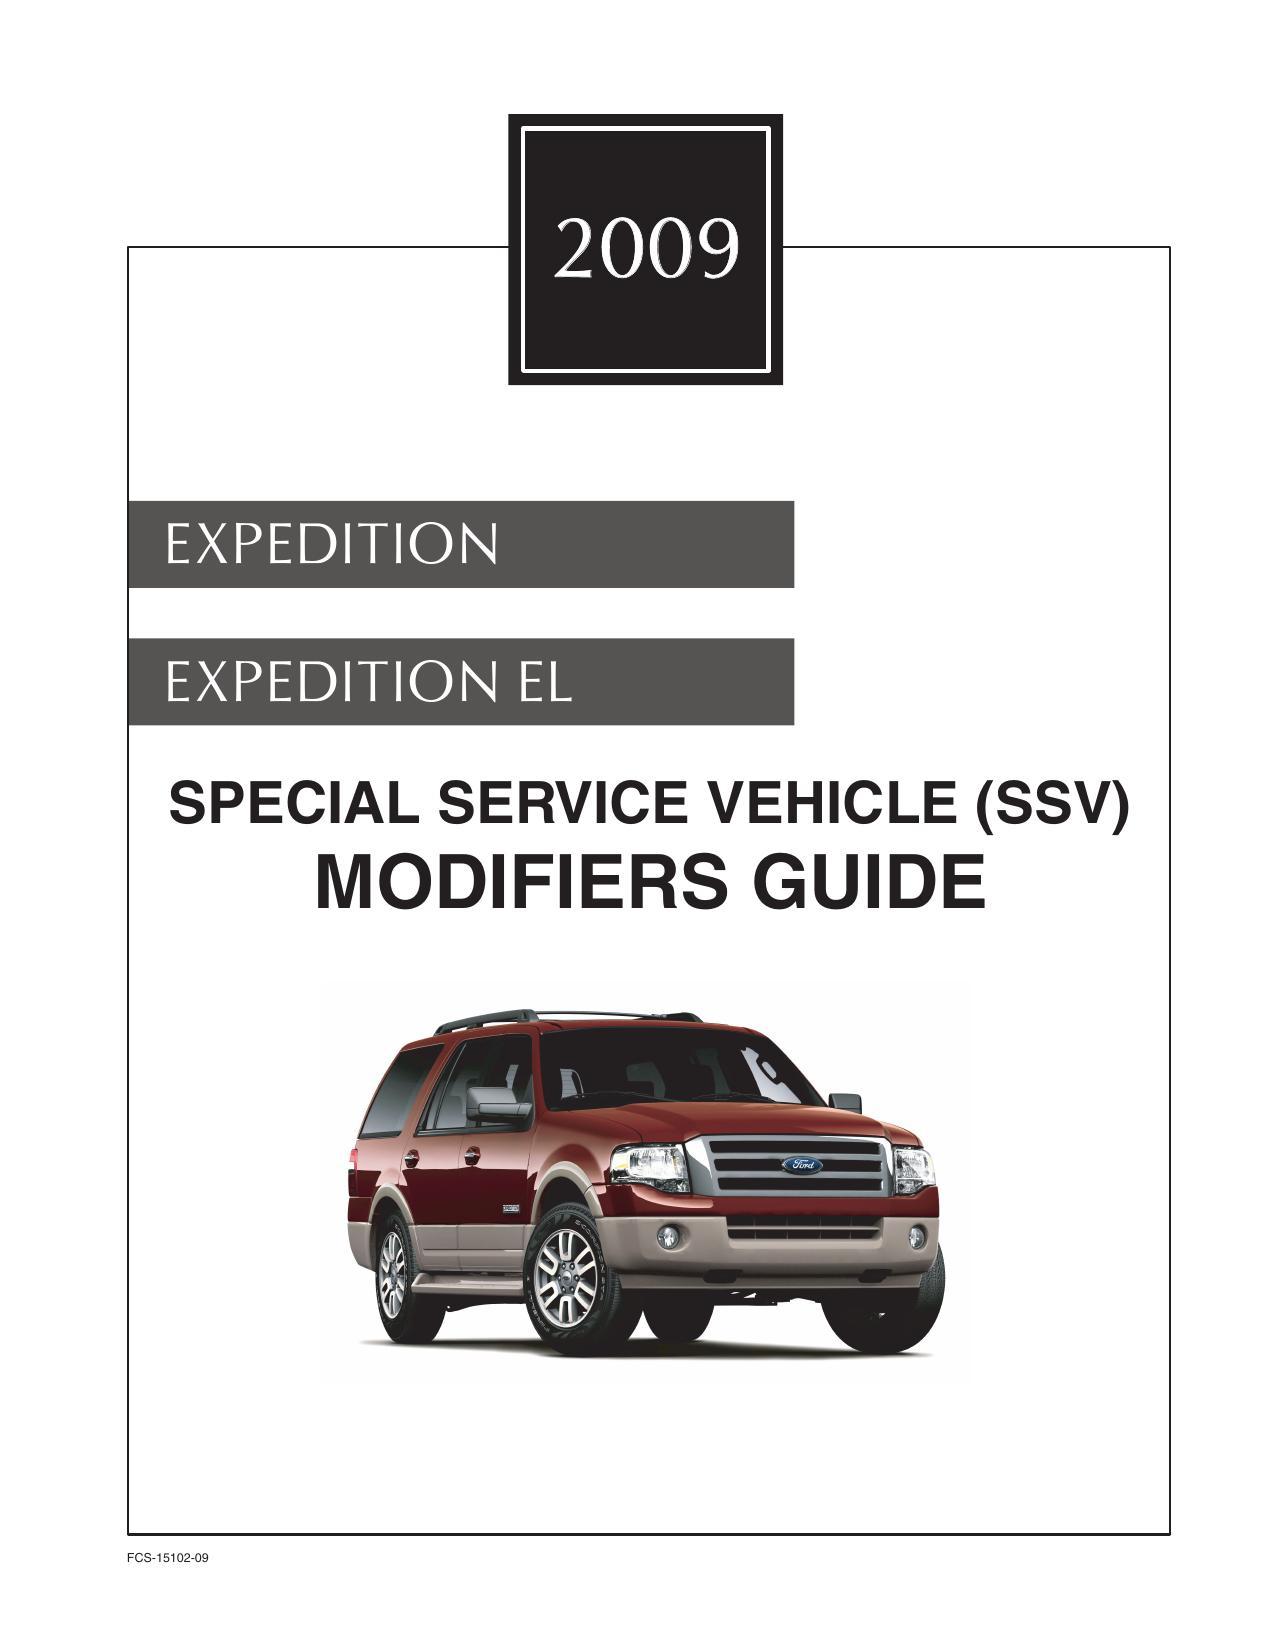 2009-expedition-ssv-modifiers-guide.pdf